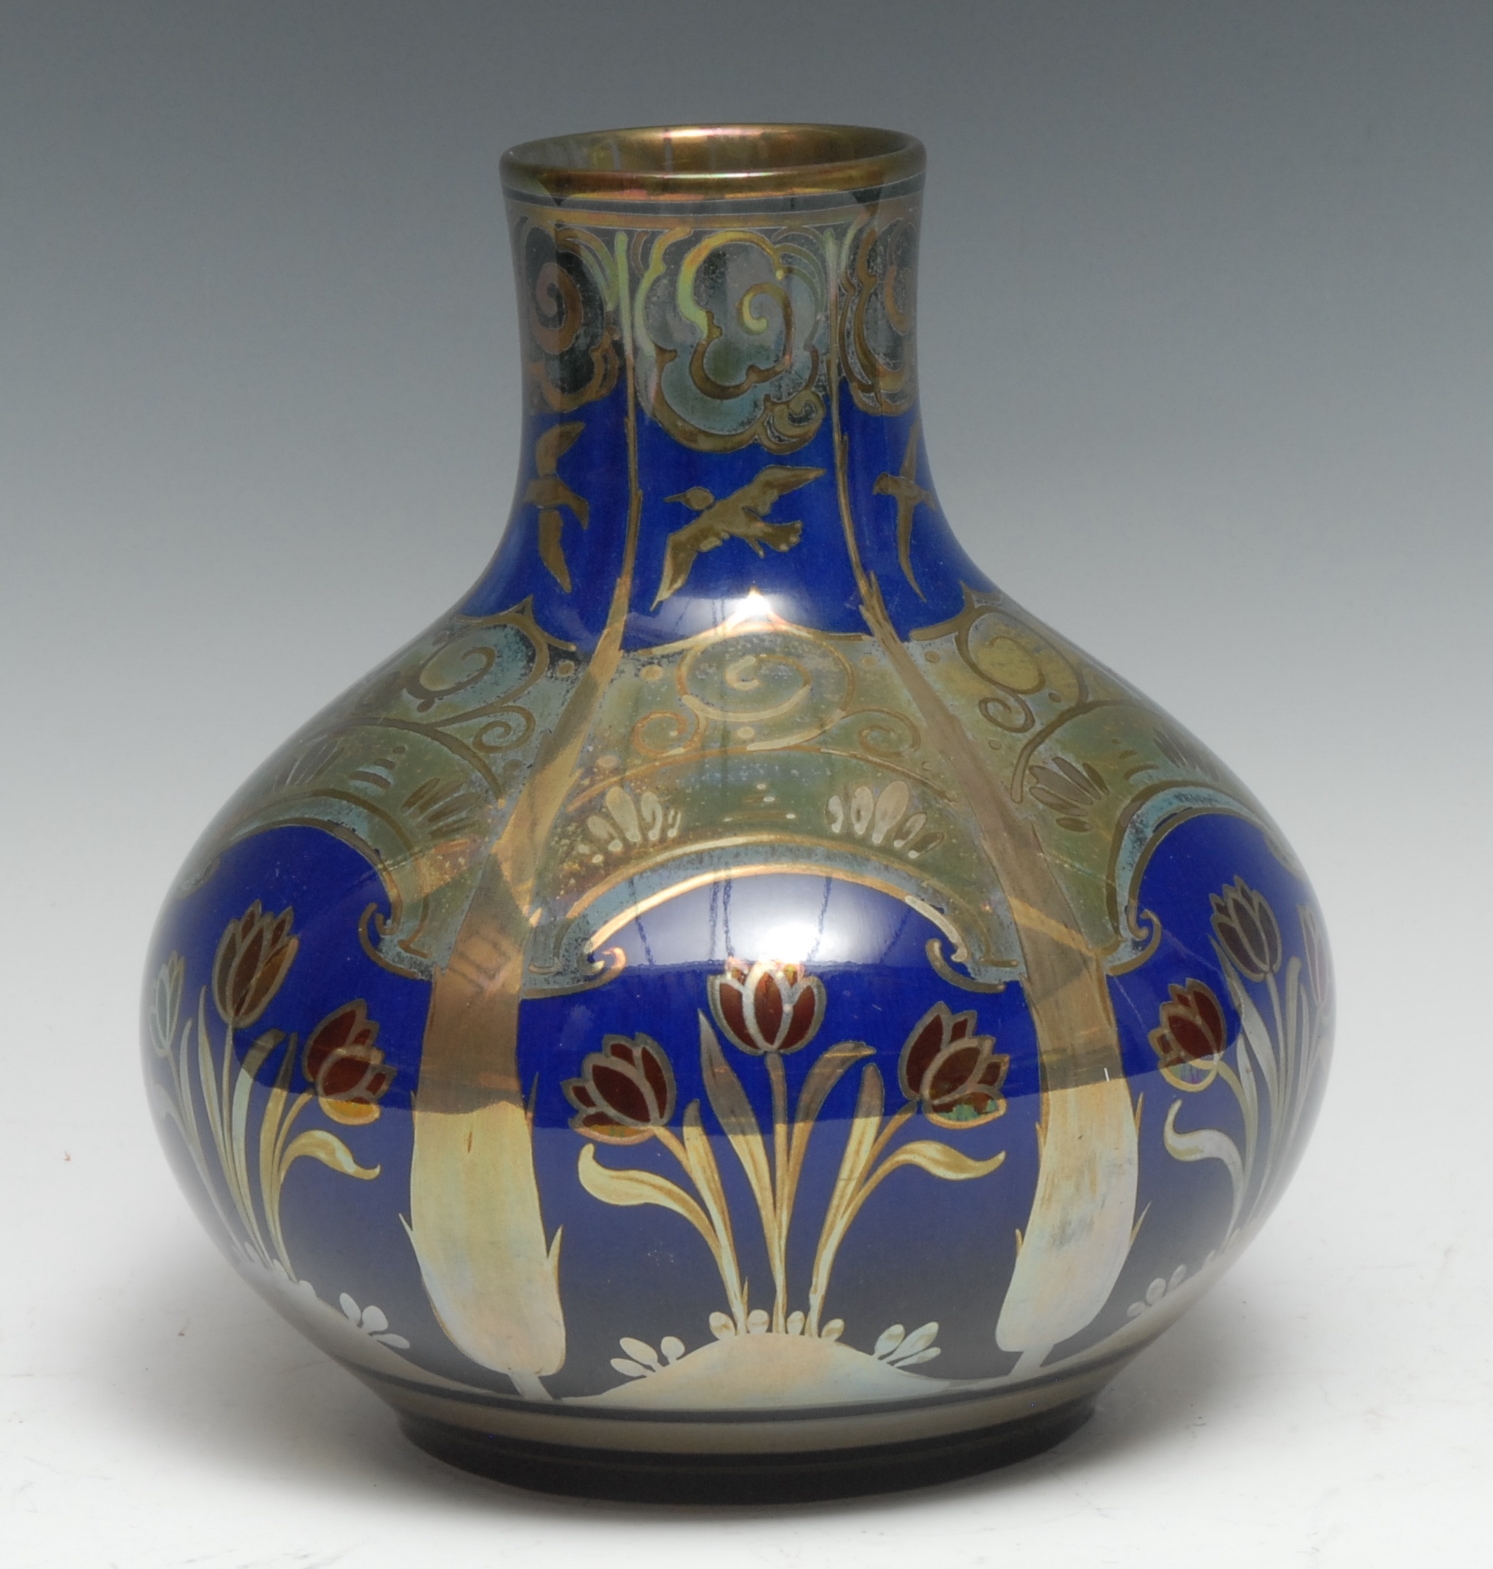 A Pilkingtons Royal Lancastrian bottle vase, designed by William S Mycock, with stylised tulips